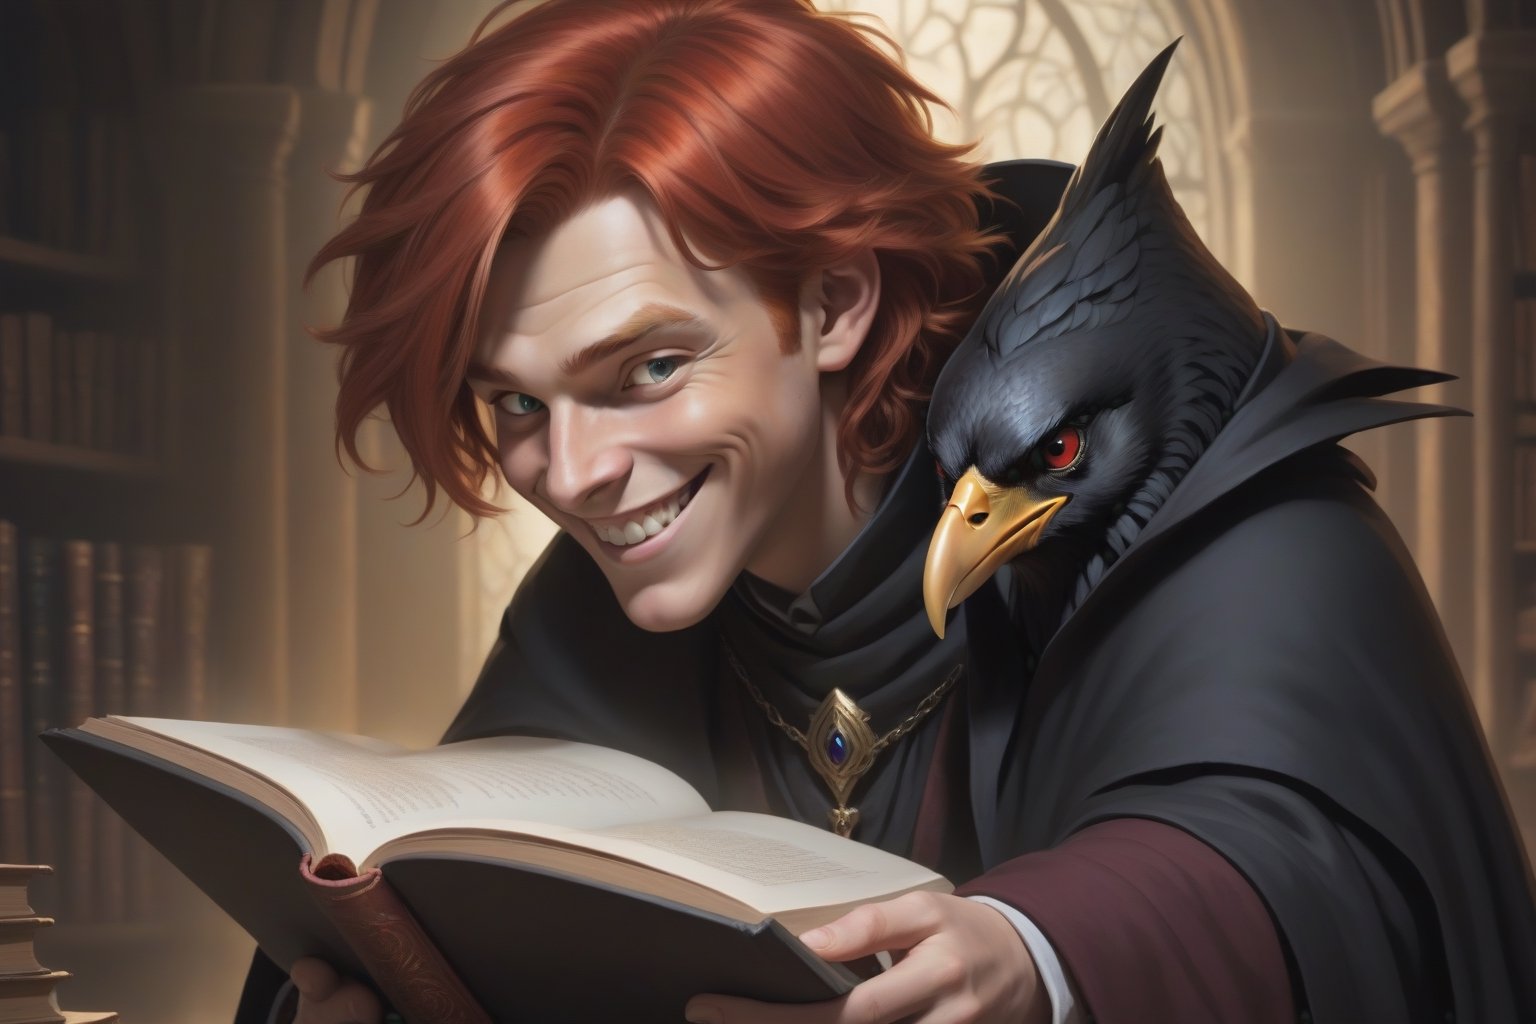 (best detailed), (best lighting), (ultra-detailed), (best quality), cunning boy wizard with red hair and evil smile, encouraging a large raven to read from a magic book.  There will be dire consequences.